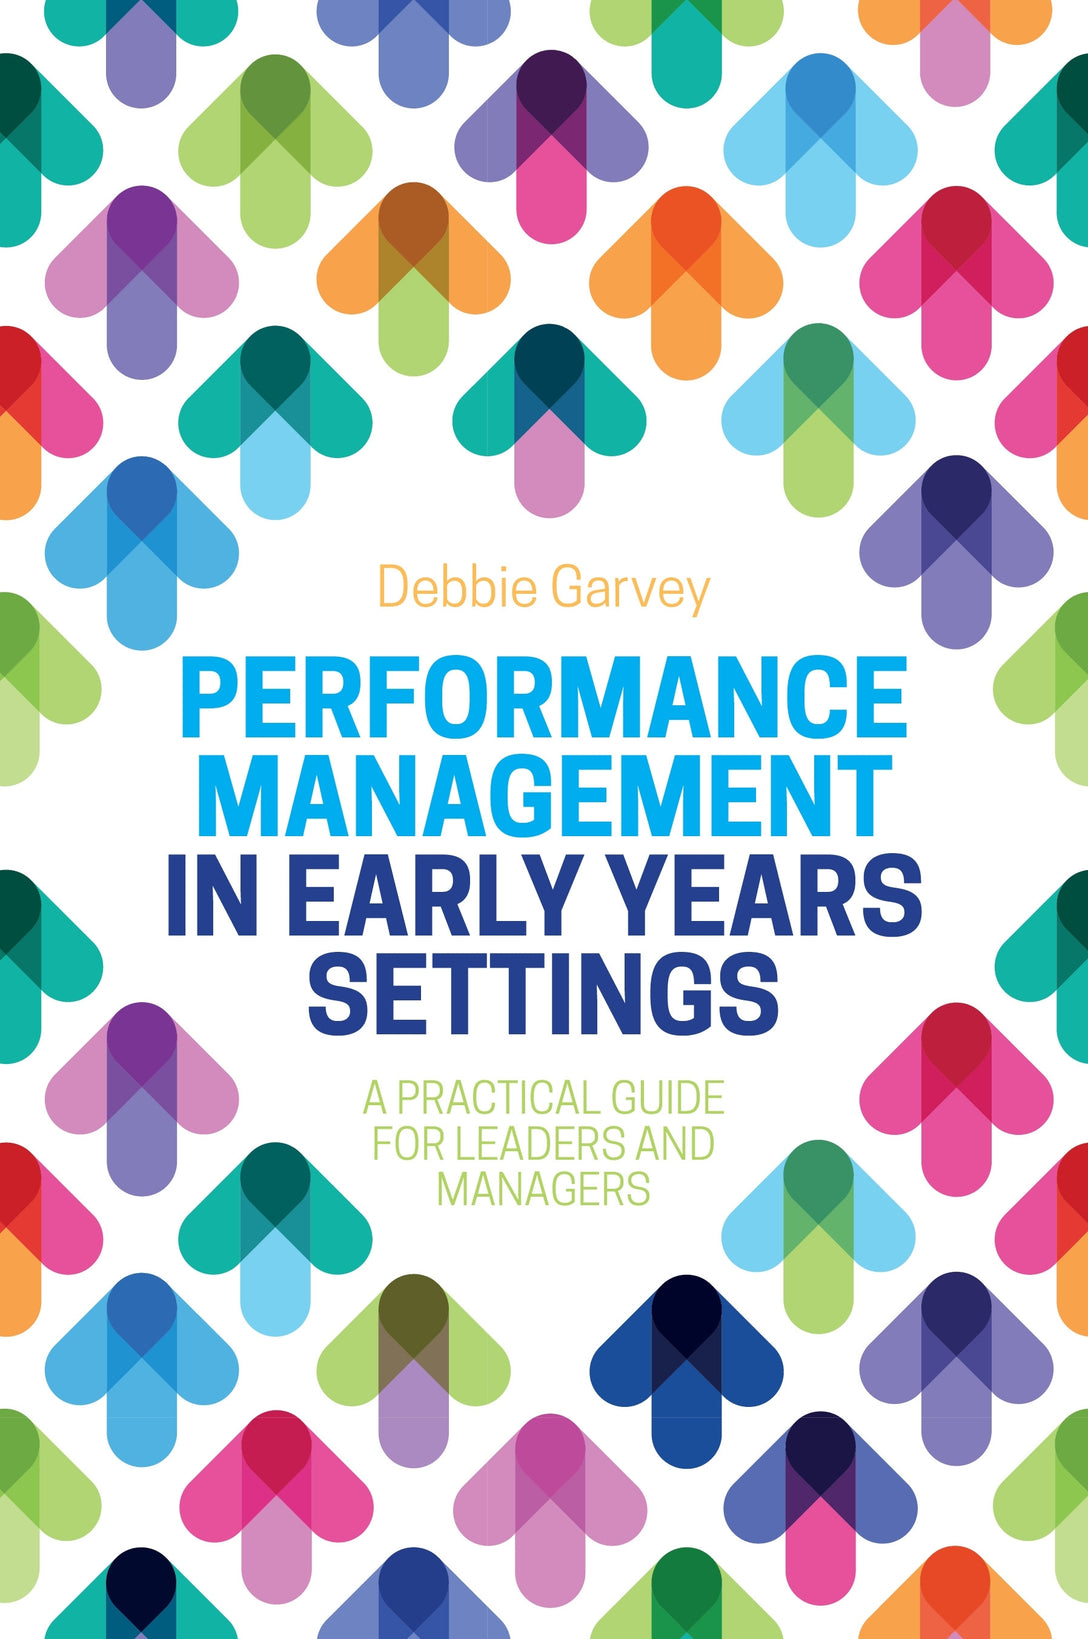 Performance Management in Early Years Settings by Debbie Garvey